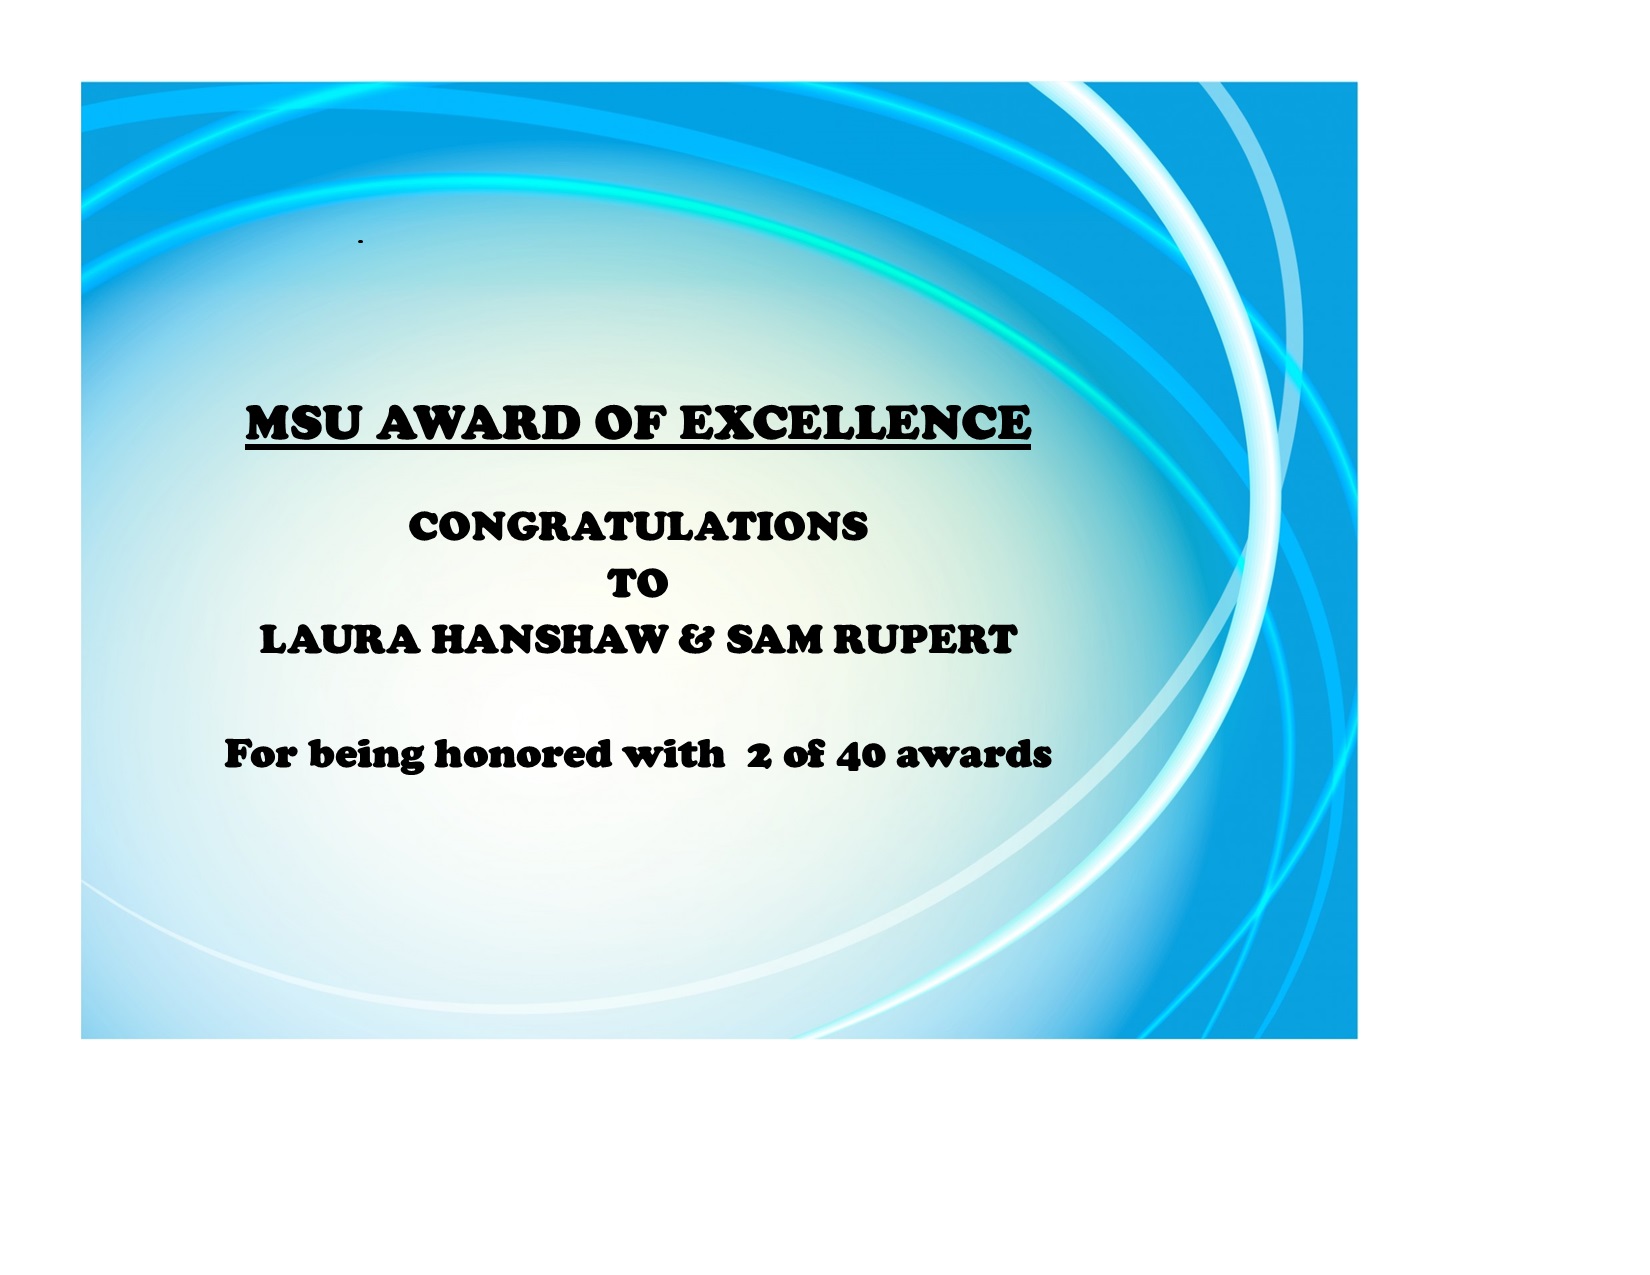 AWARD OF EXCELLENCE 2022